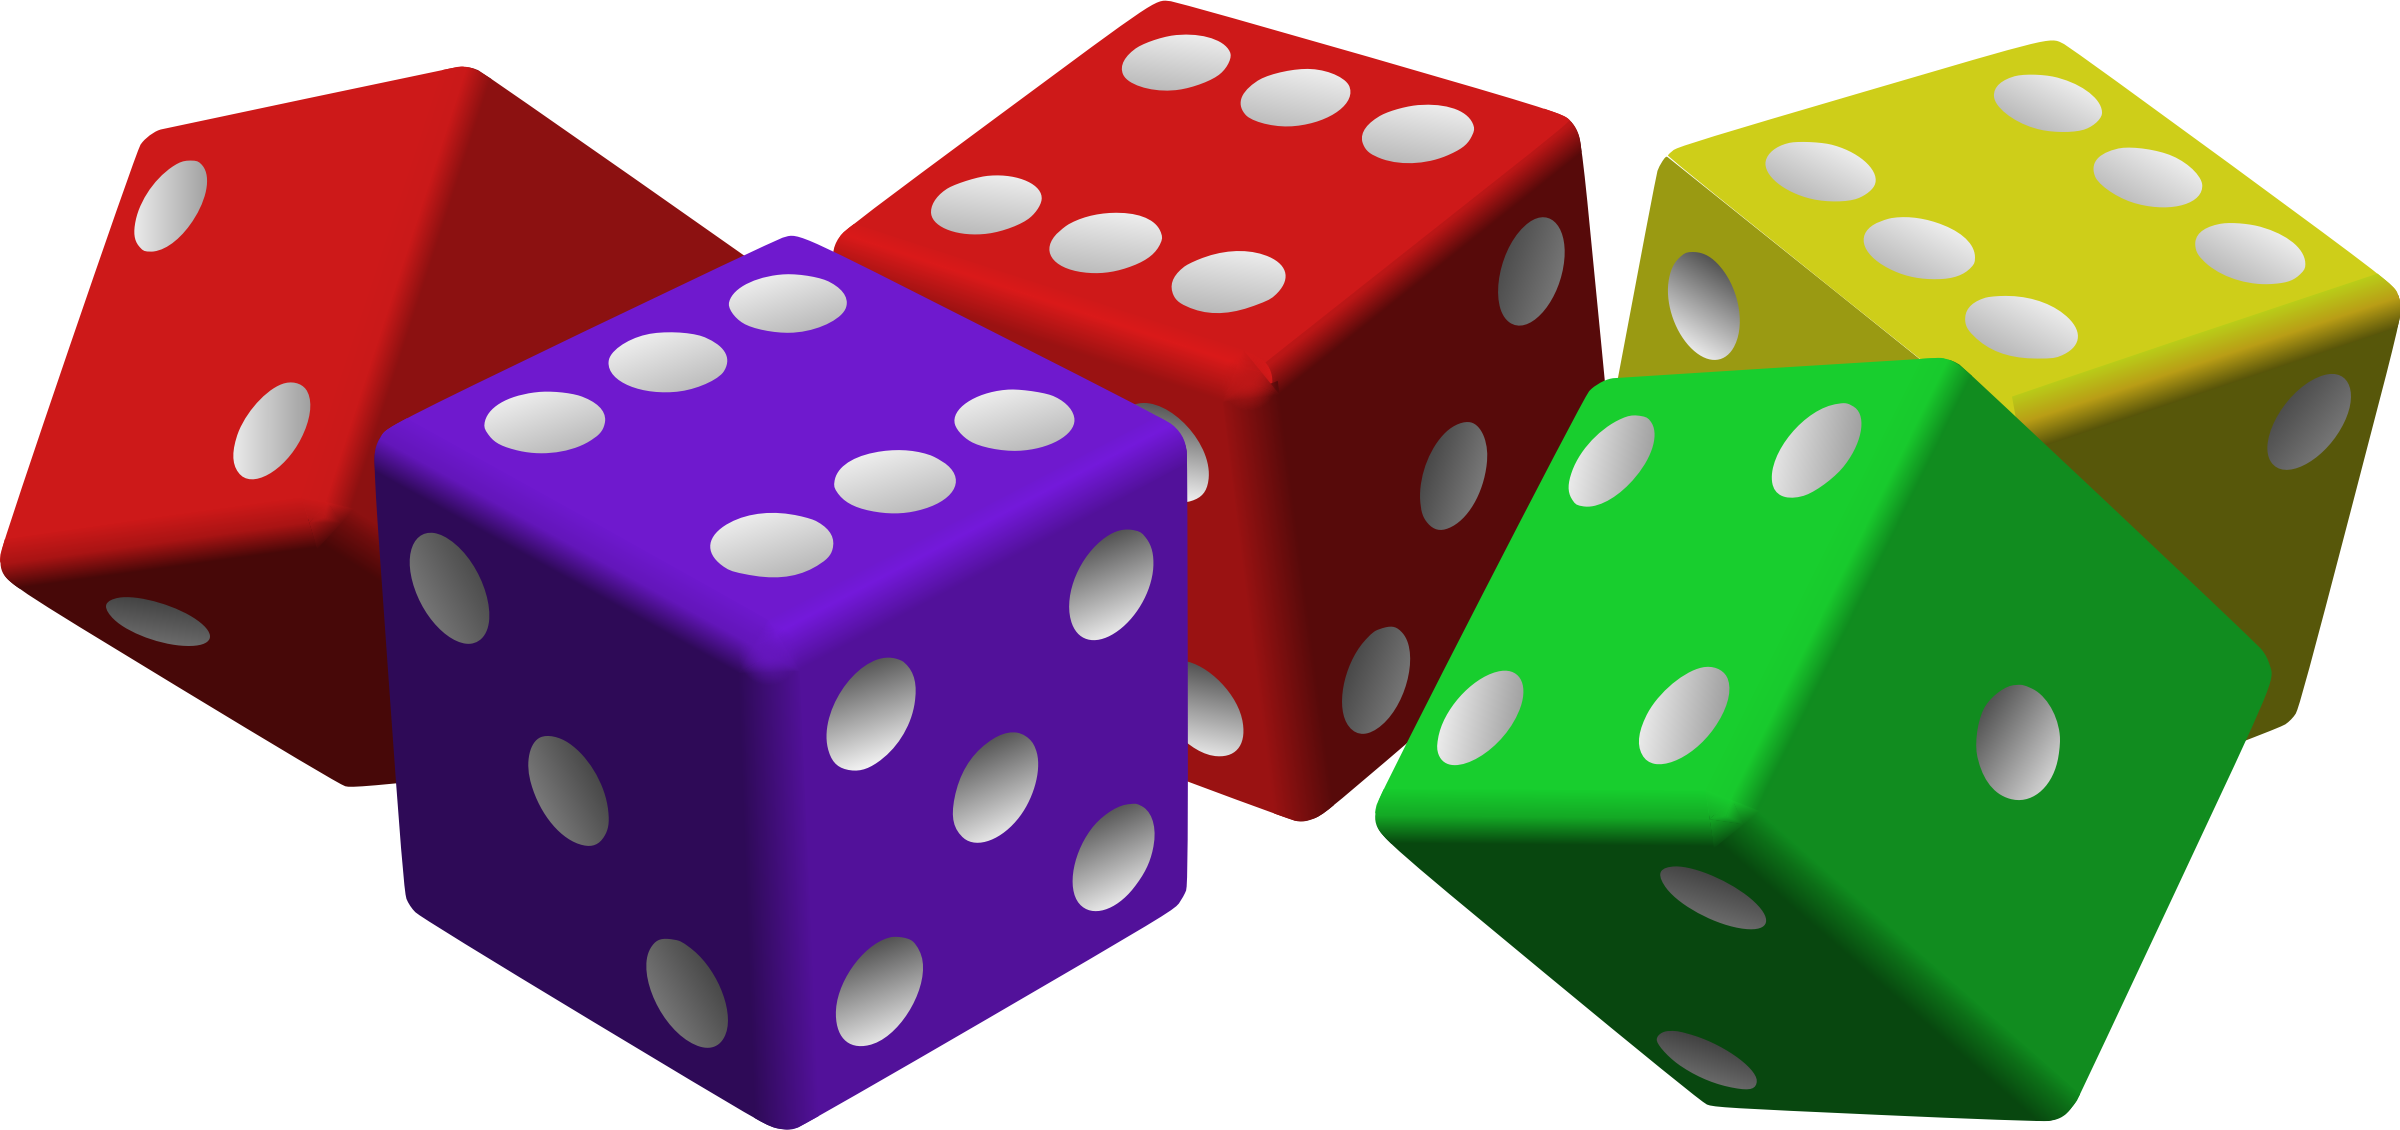 green dice clipart - photo #29